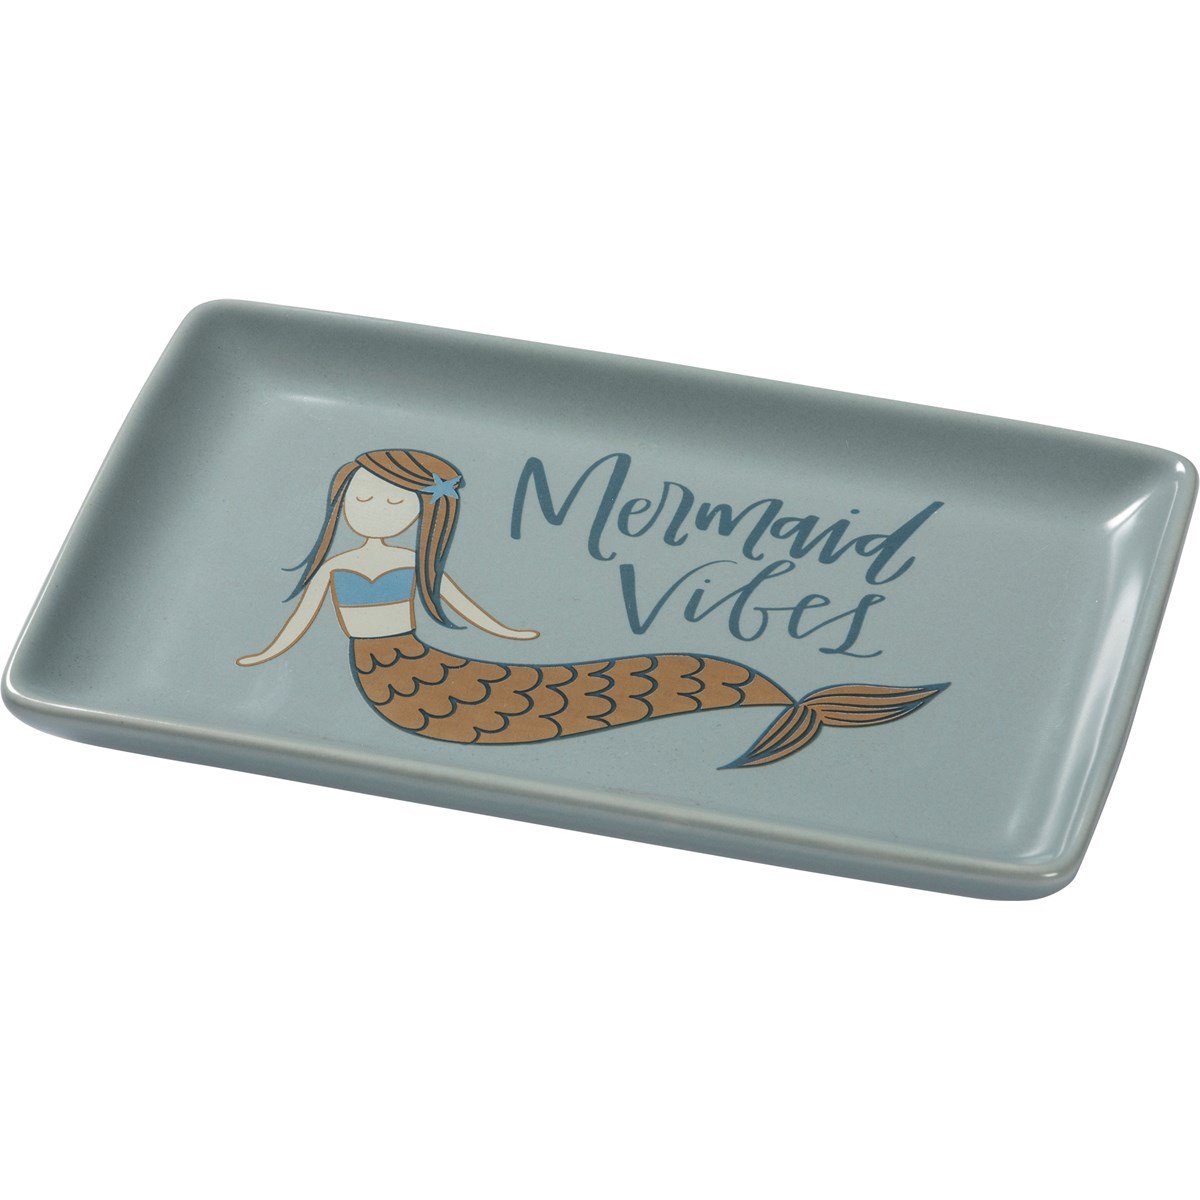 Mermaid Vibes Trinket Tray - Jewelry Holders & Gift Boxes